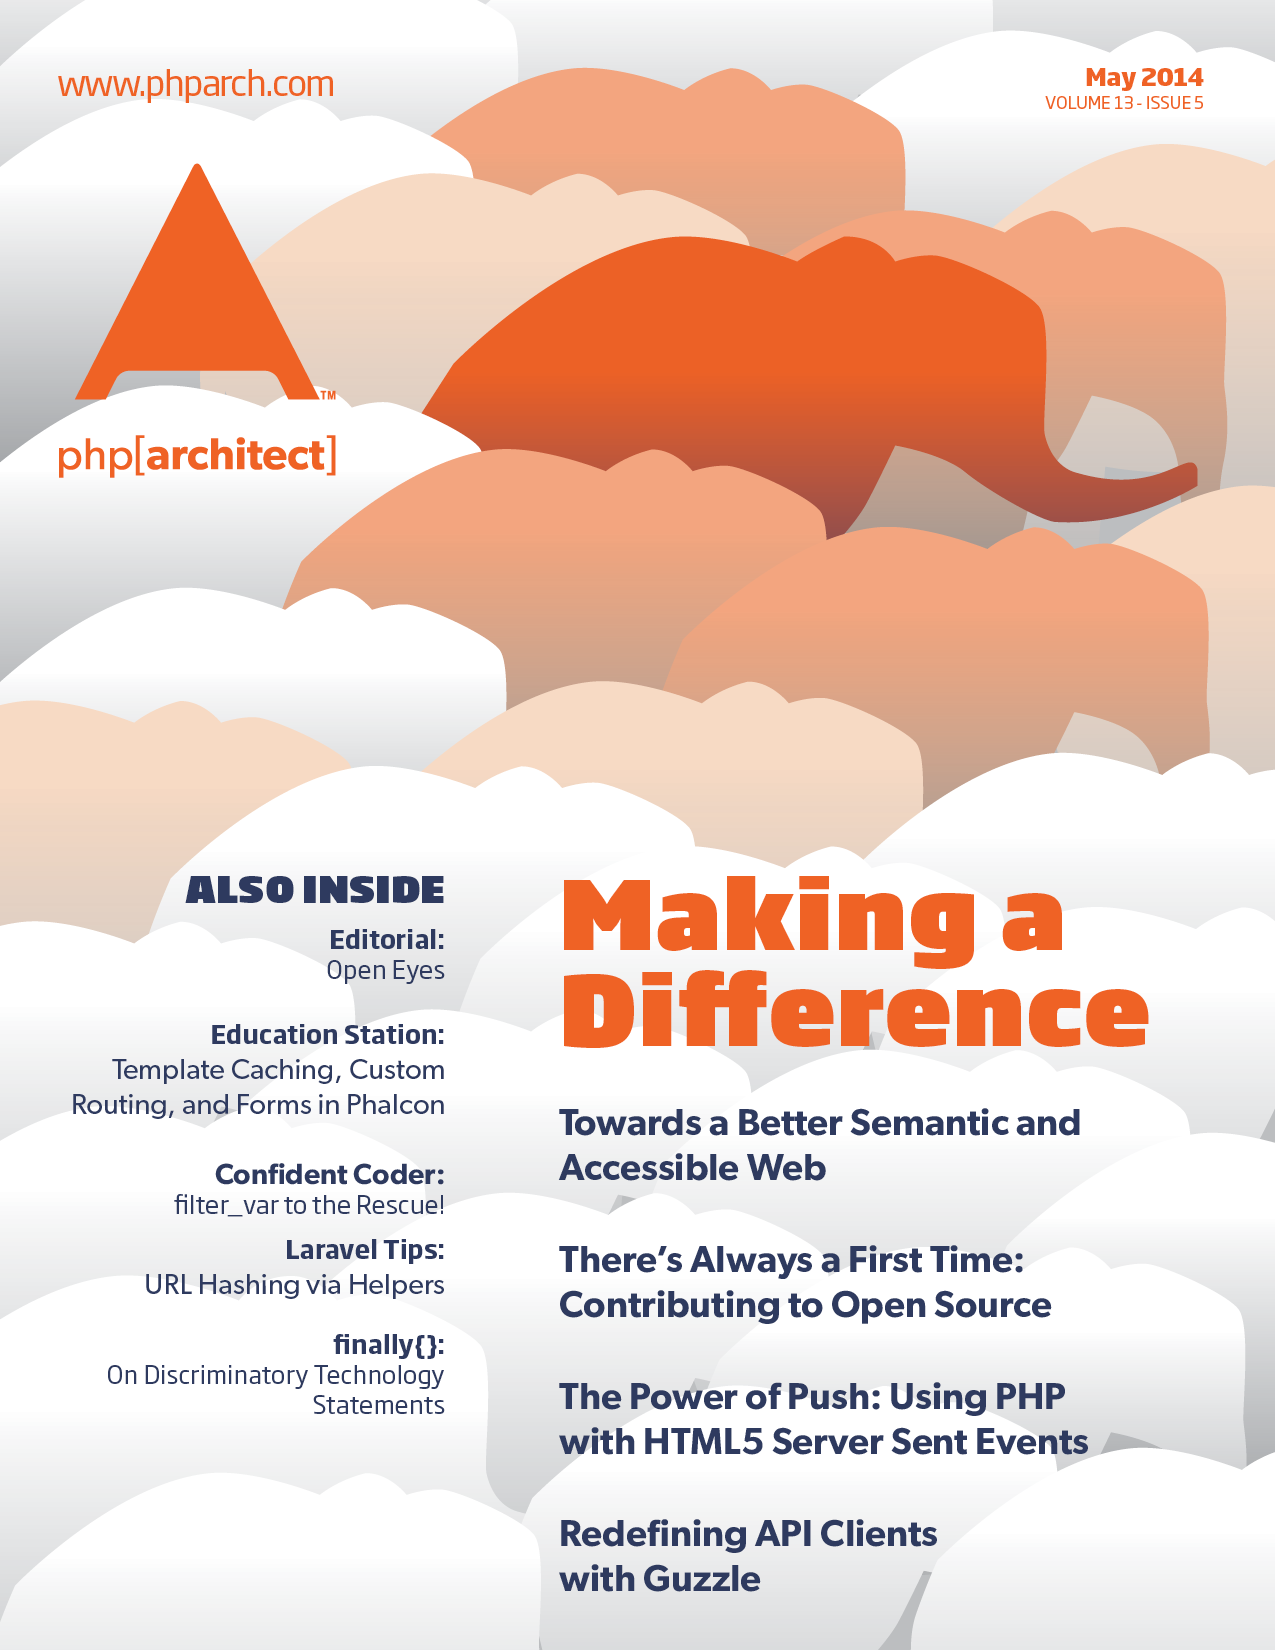 php[architect] May 2014 - Making a Difference